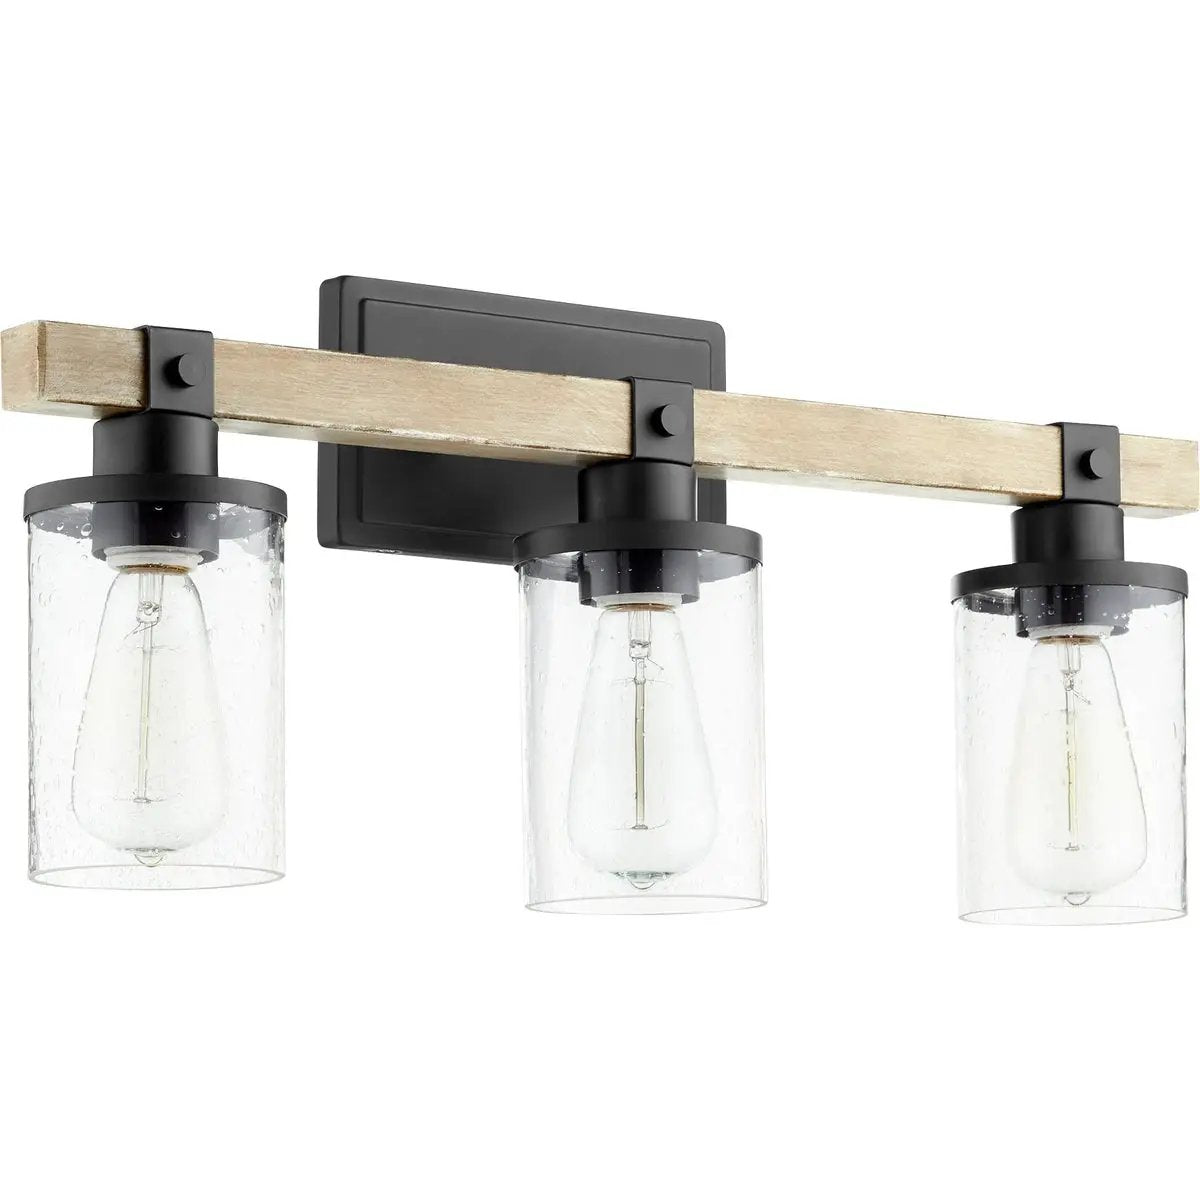 A modern farmhouse vanity light with three clear glass bulbs, perfect for rustic style applications.